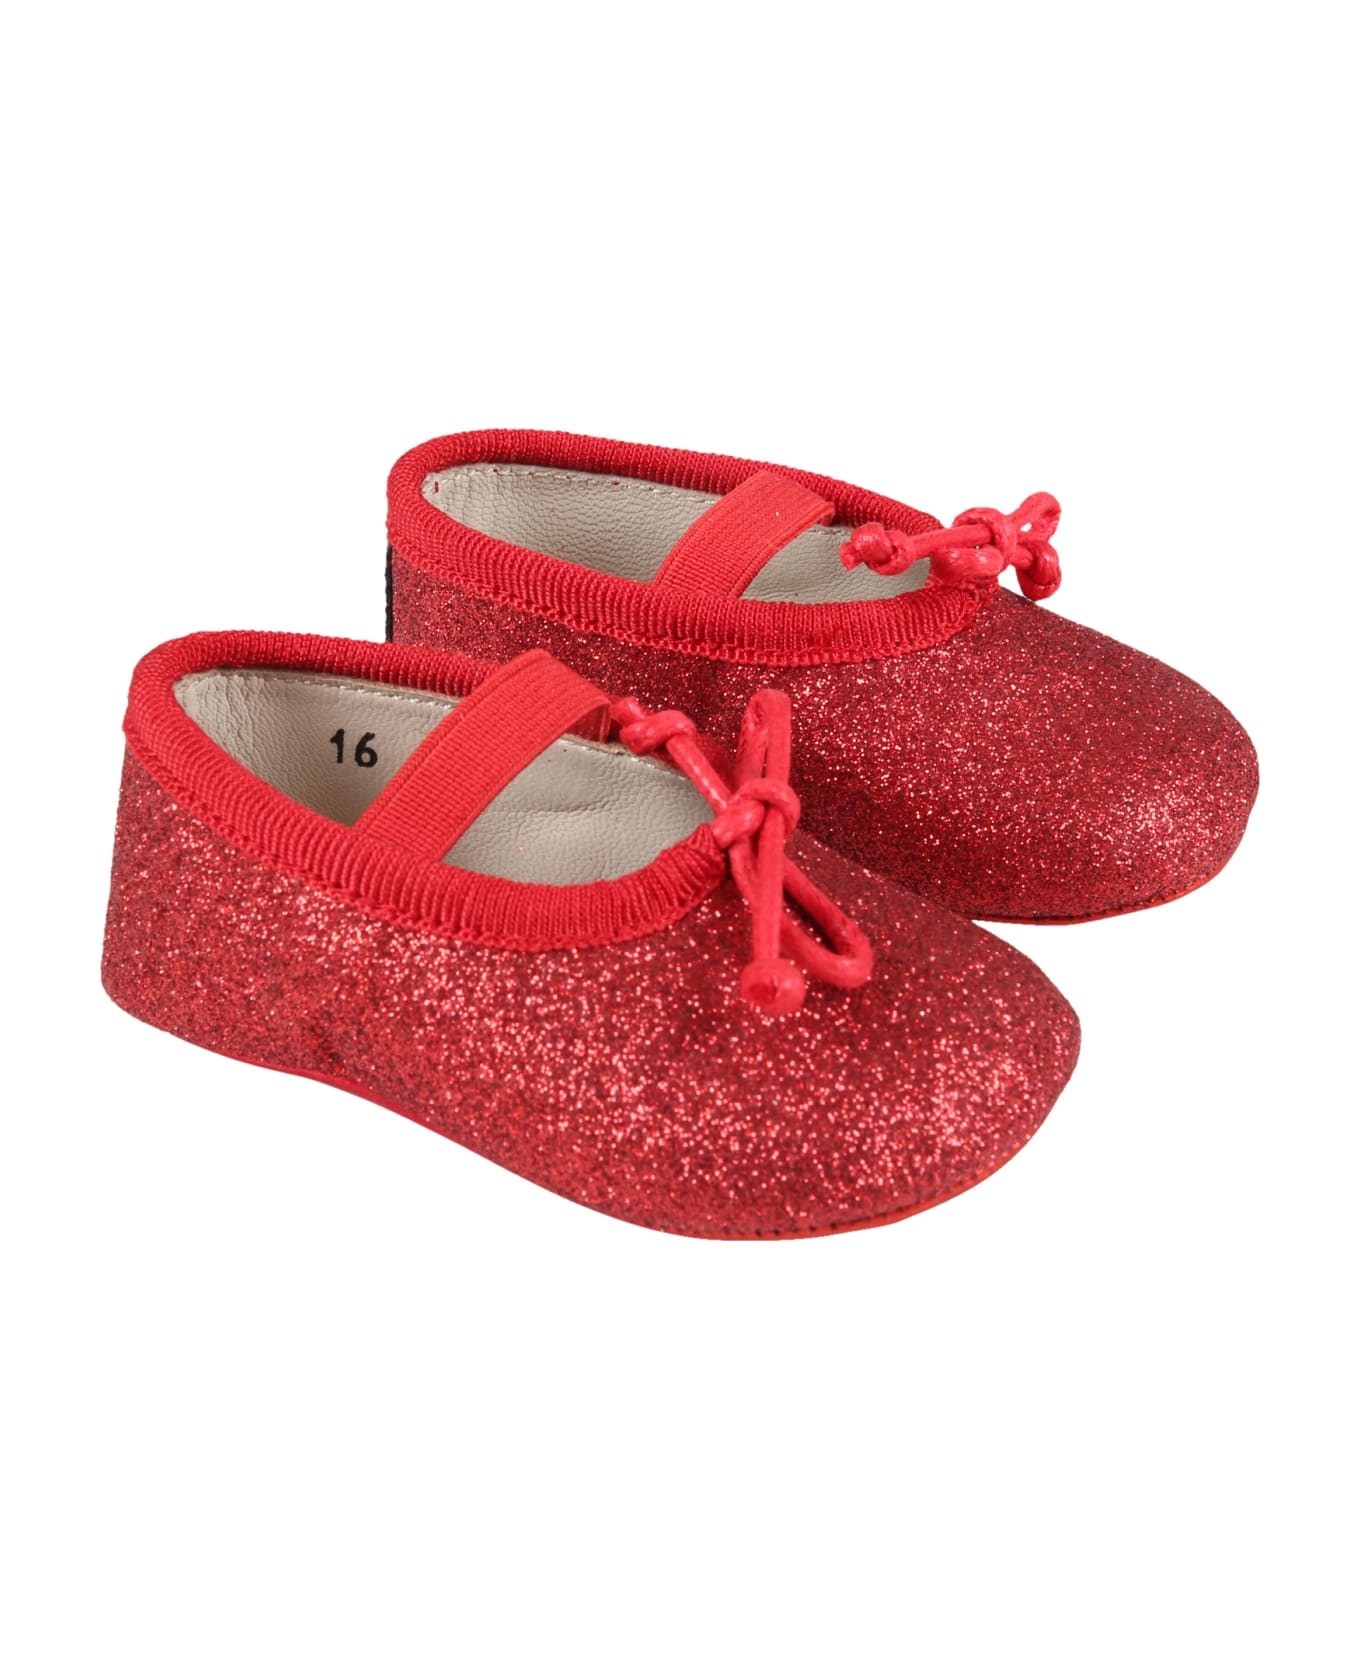 Gallucci Red Ballet Flats For Baby Girl - Red